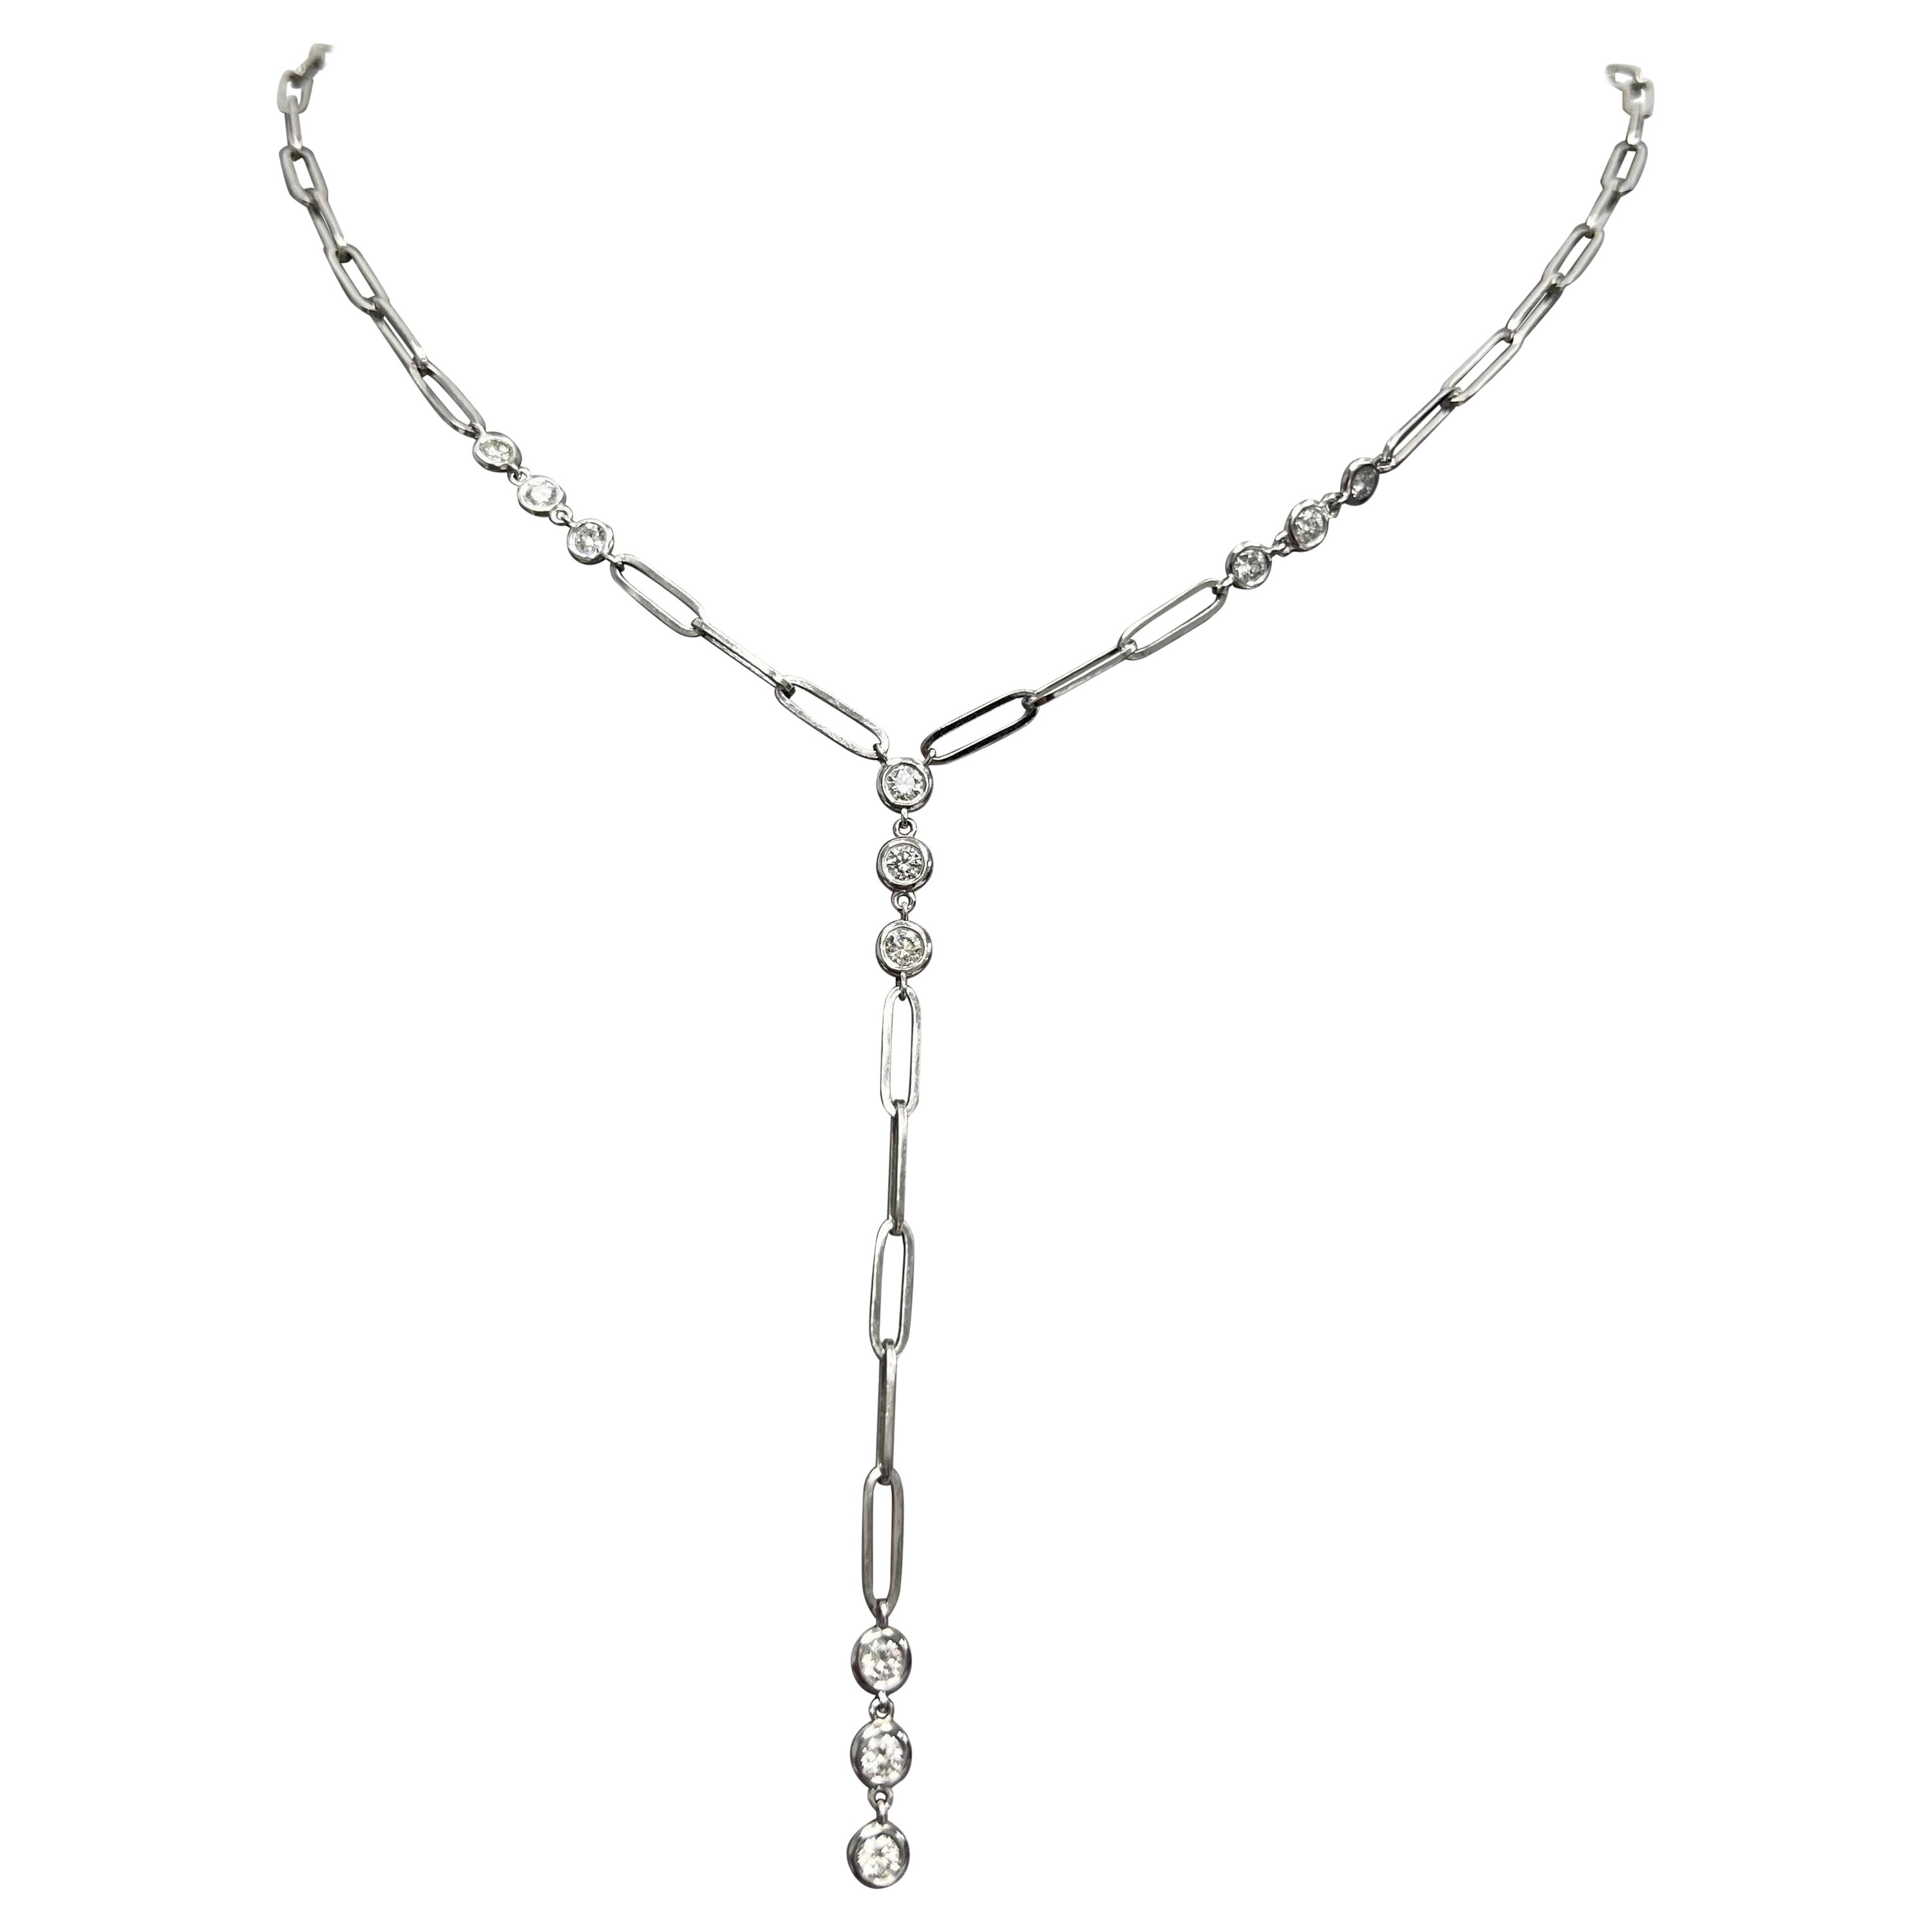 Diamond By The Yards Necklace with Paper-Clip Chain
Natural Full Brilliant Cut Diamonds
14k White Gold
12 Diamonds, 1.00 Total Carat Weight
